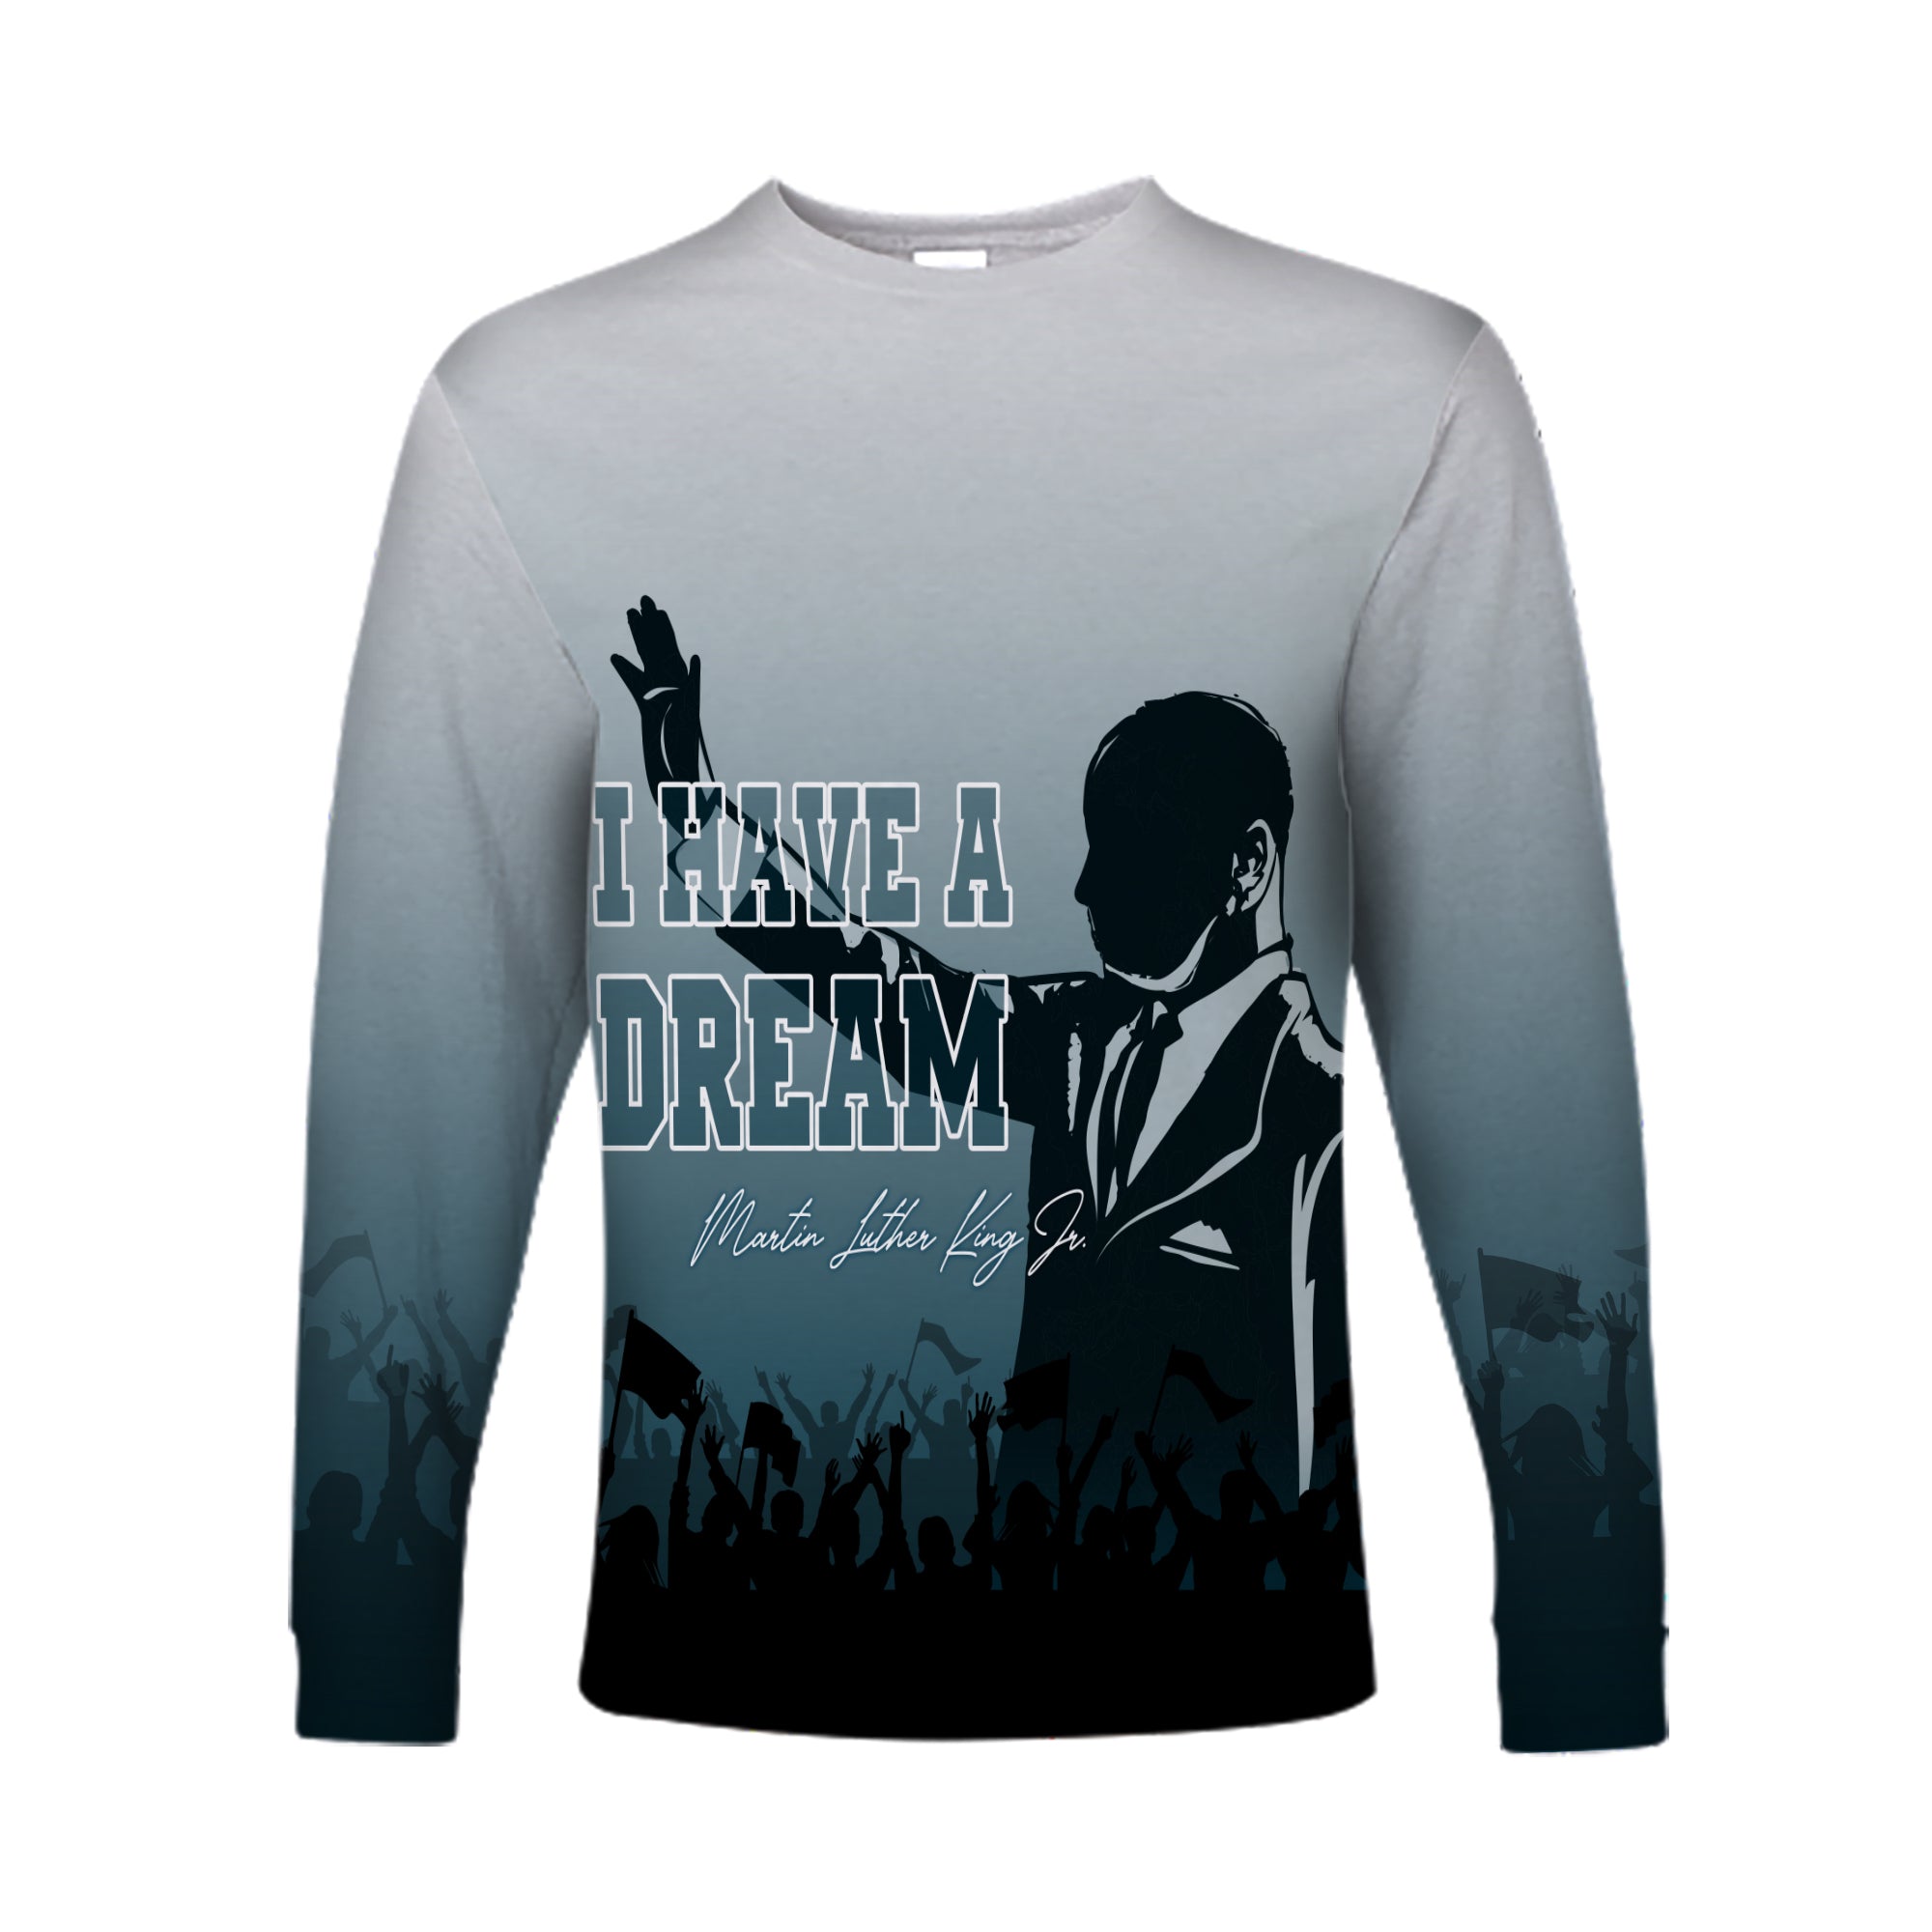 mlk-day-long-sleeves-shirt-i-have-a-dream